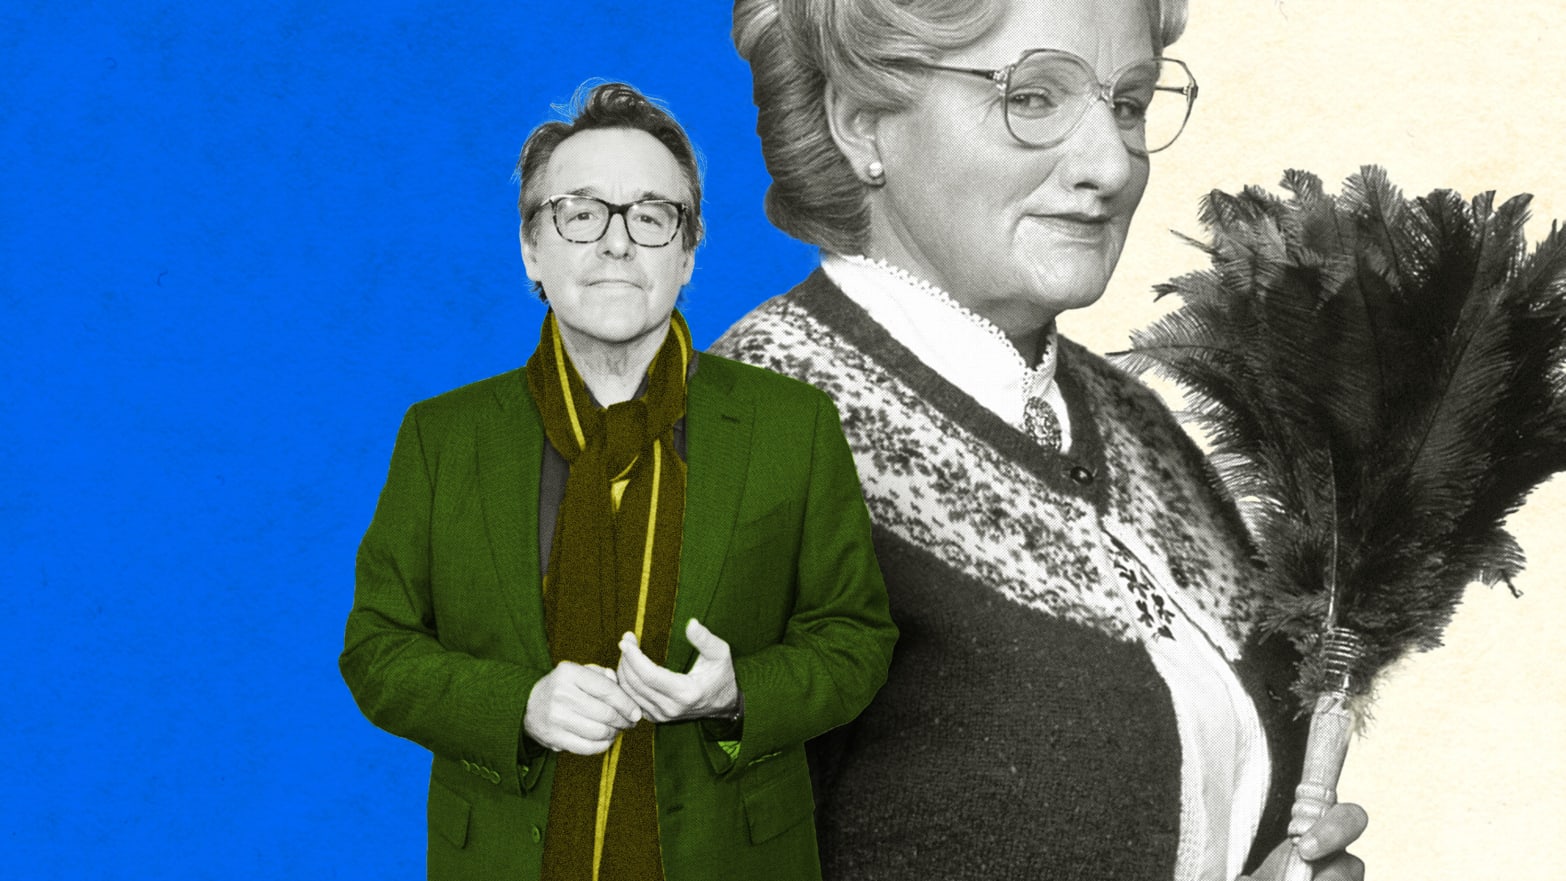 A photo illustration of Chris Columbus with Mrs. Doubtfire behind him